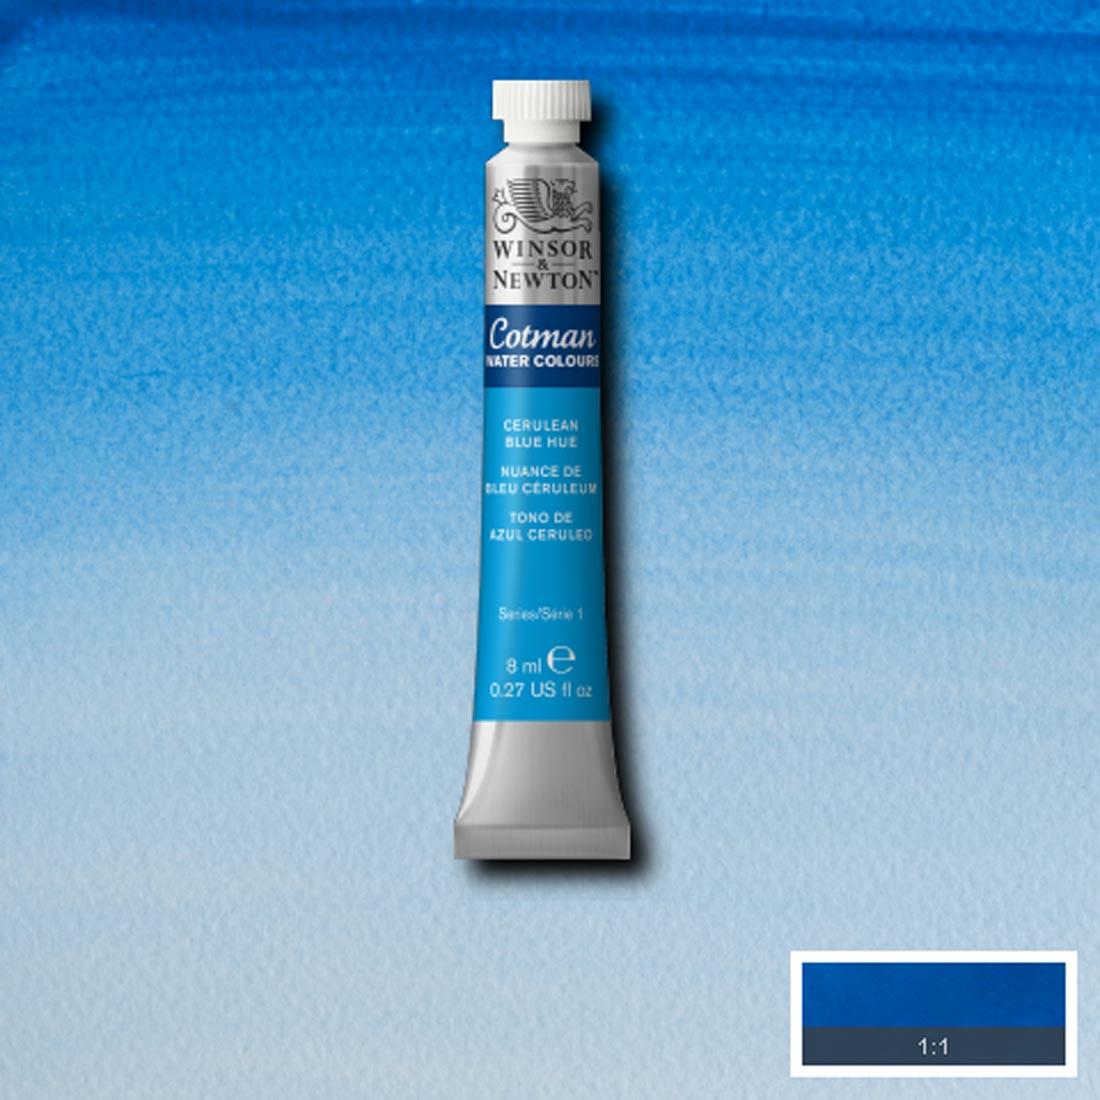 Tube of Cerulean Blue Hue Winsor and Newton Cotman Water Colour with a paint swatch for the background